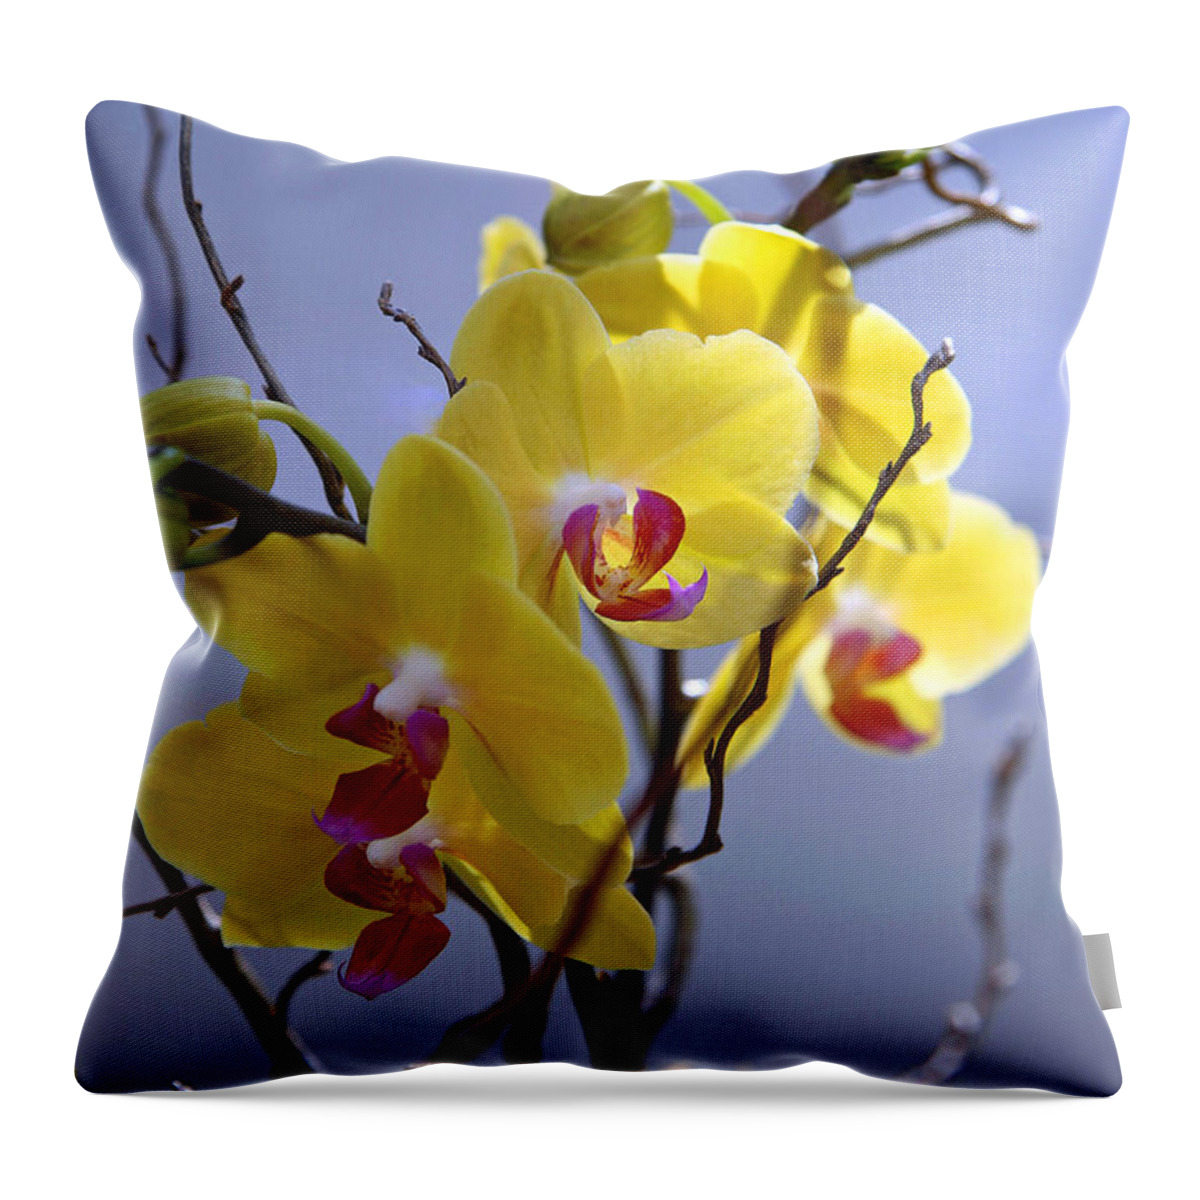 Yellow Throw Pillow featuring the photograph A Family Of Orchids by Cora Wandel